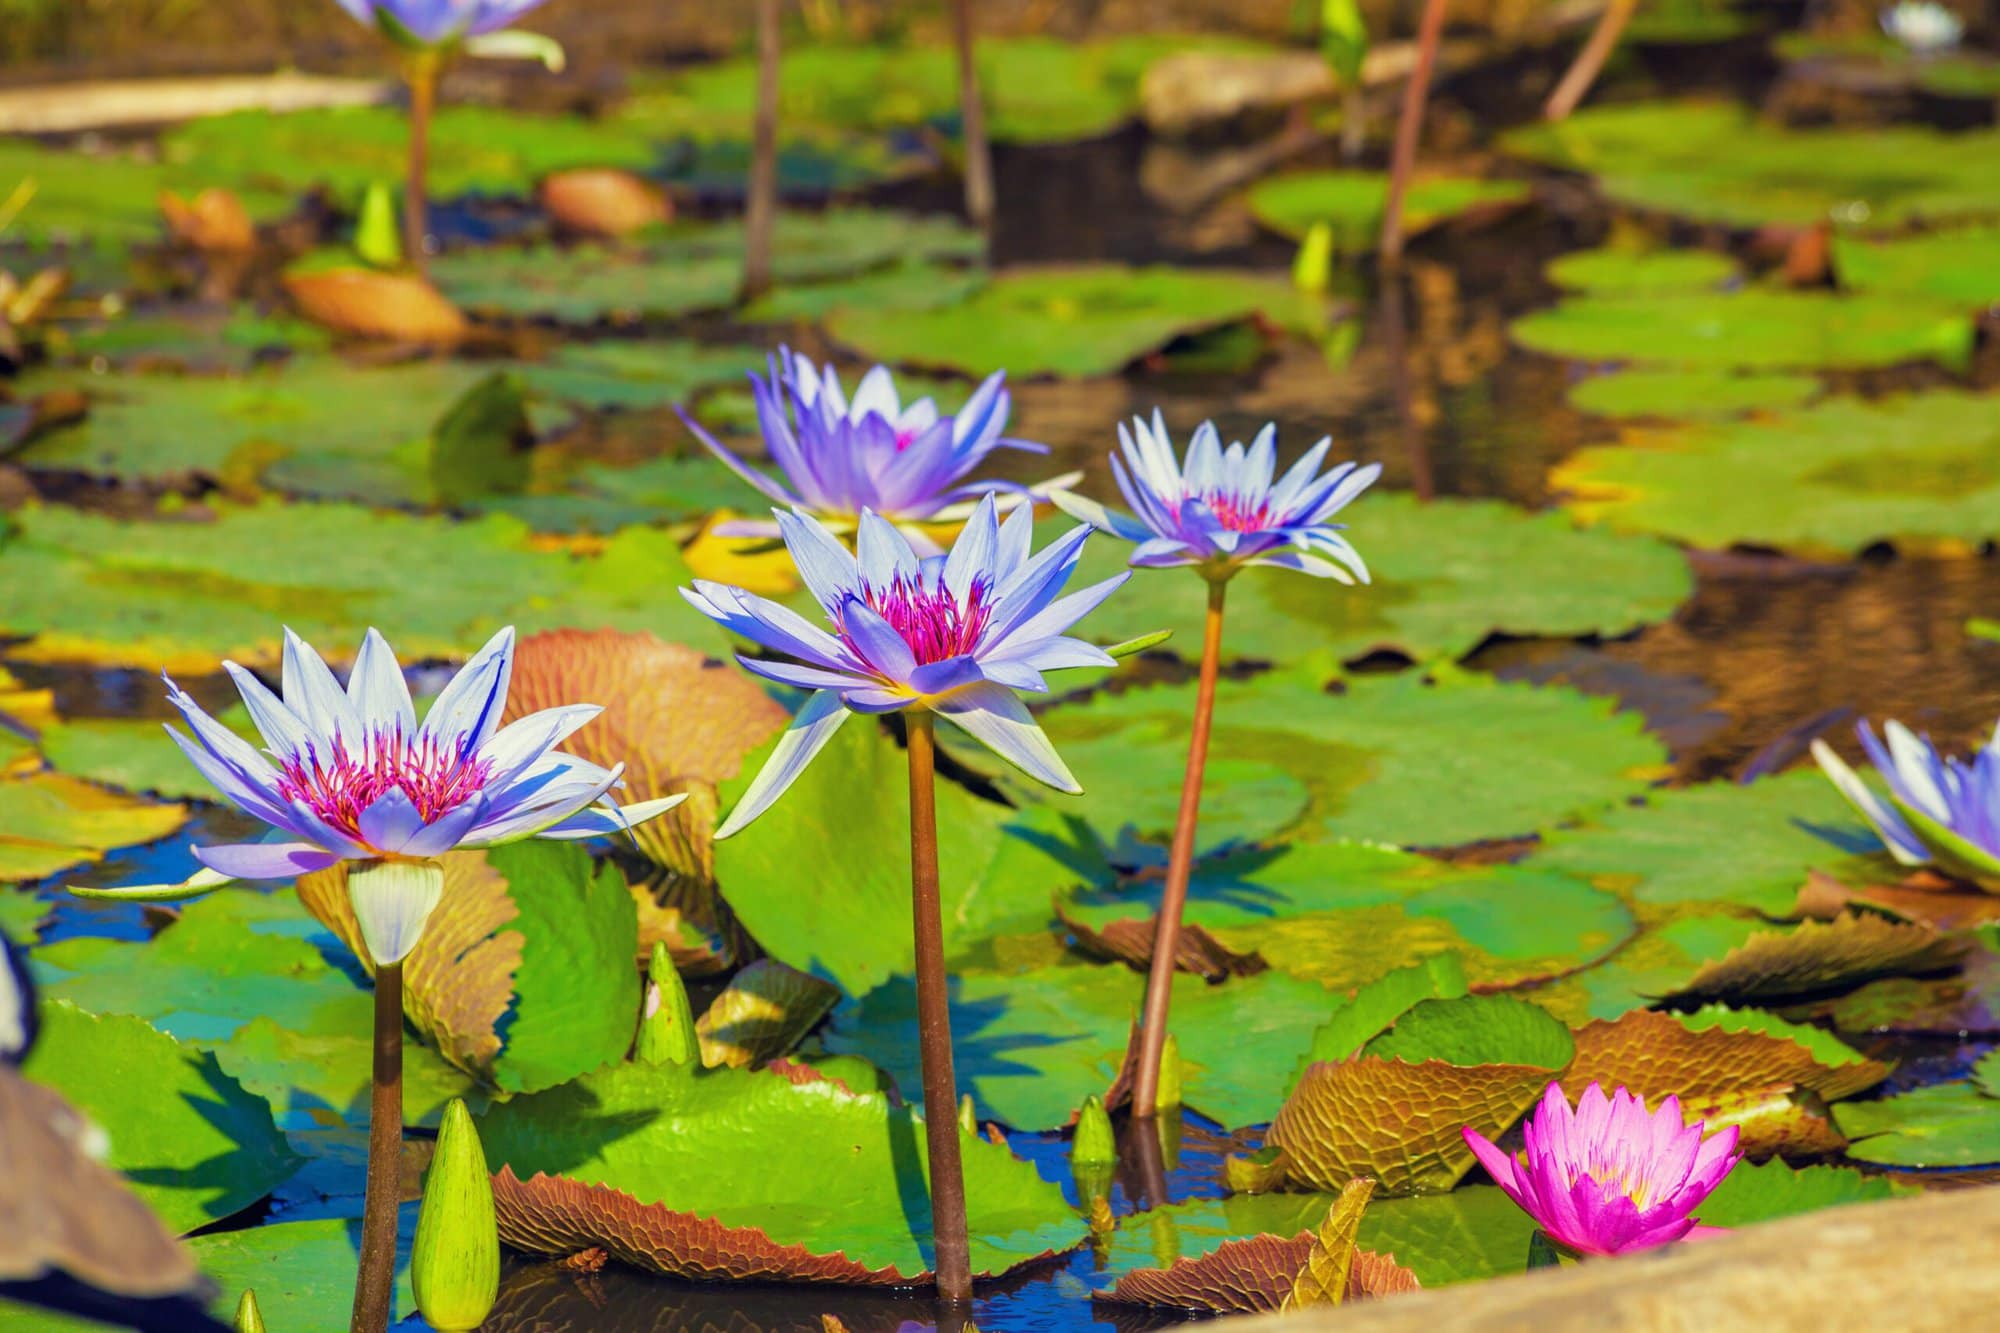 Blue Lily Flowers in a pond